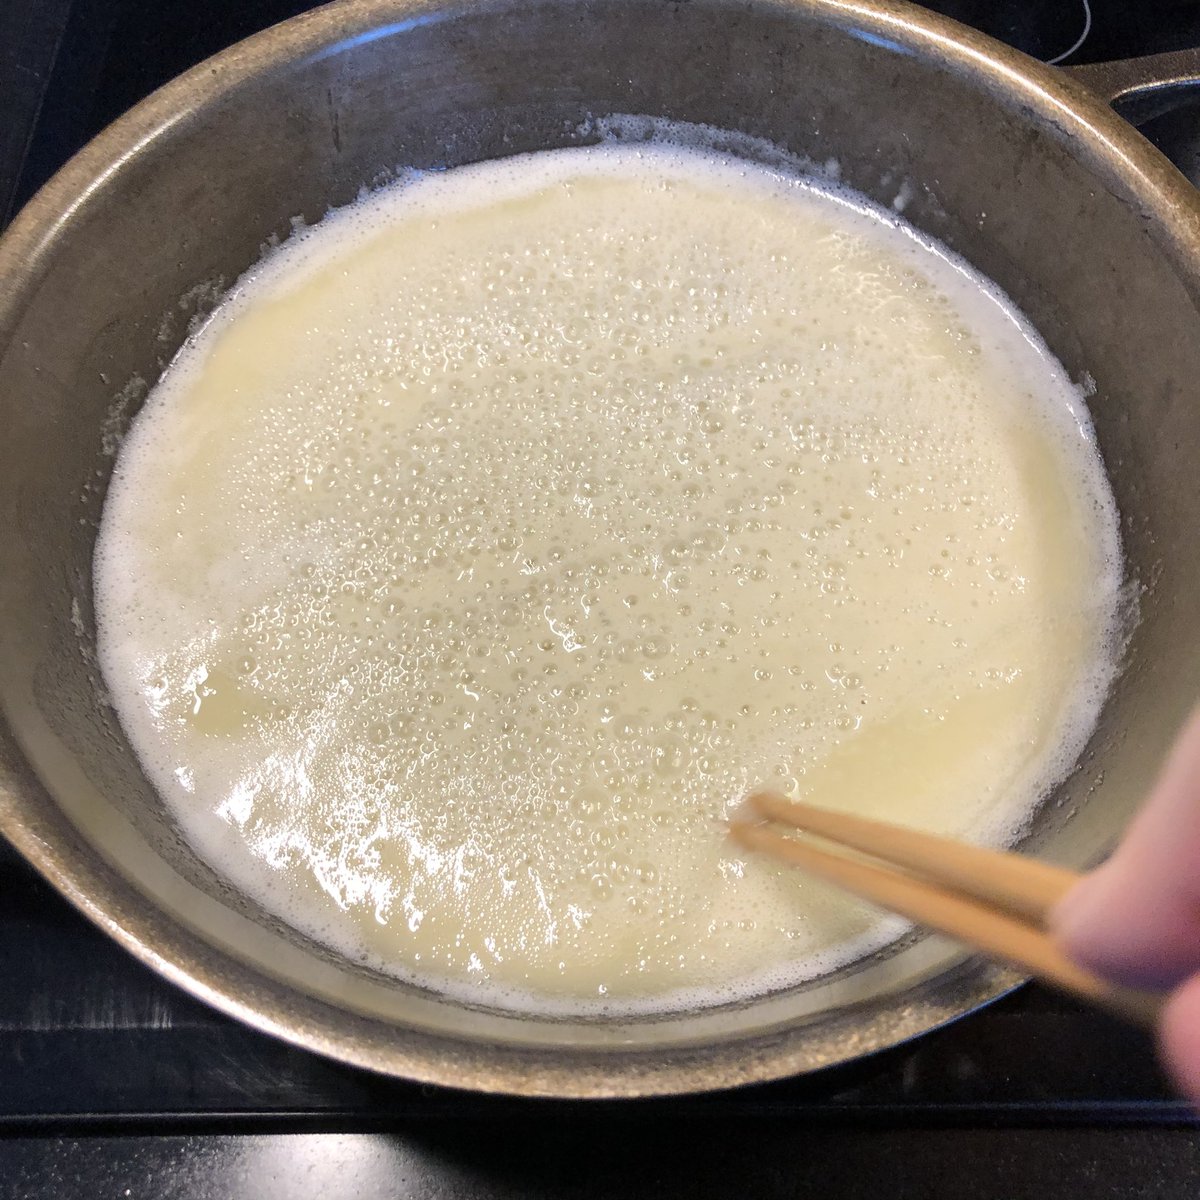 This flour is excellent! No clumps, no stress. Also, yes, I do use chopsticks. I’m the only person I know who uses chopsticks to stir, others use wooden spoons.